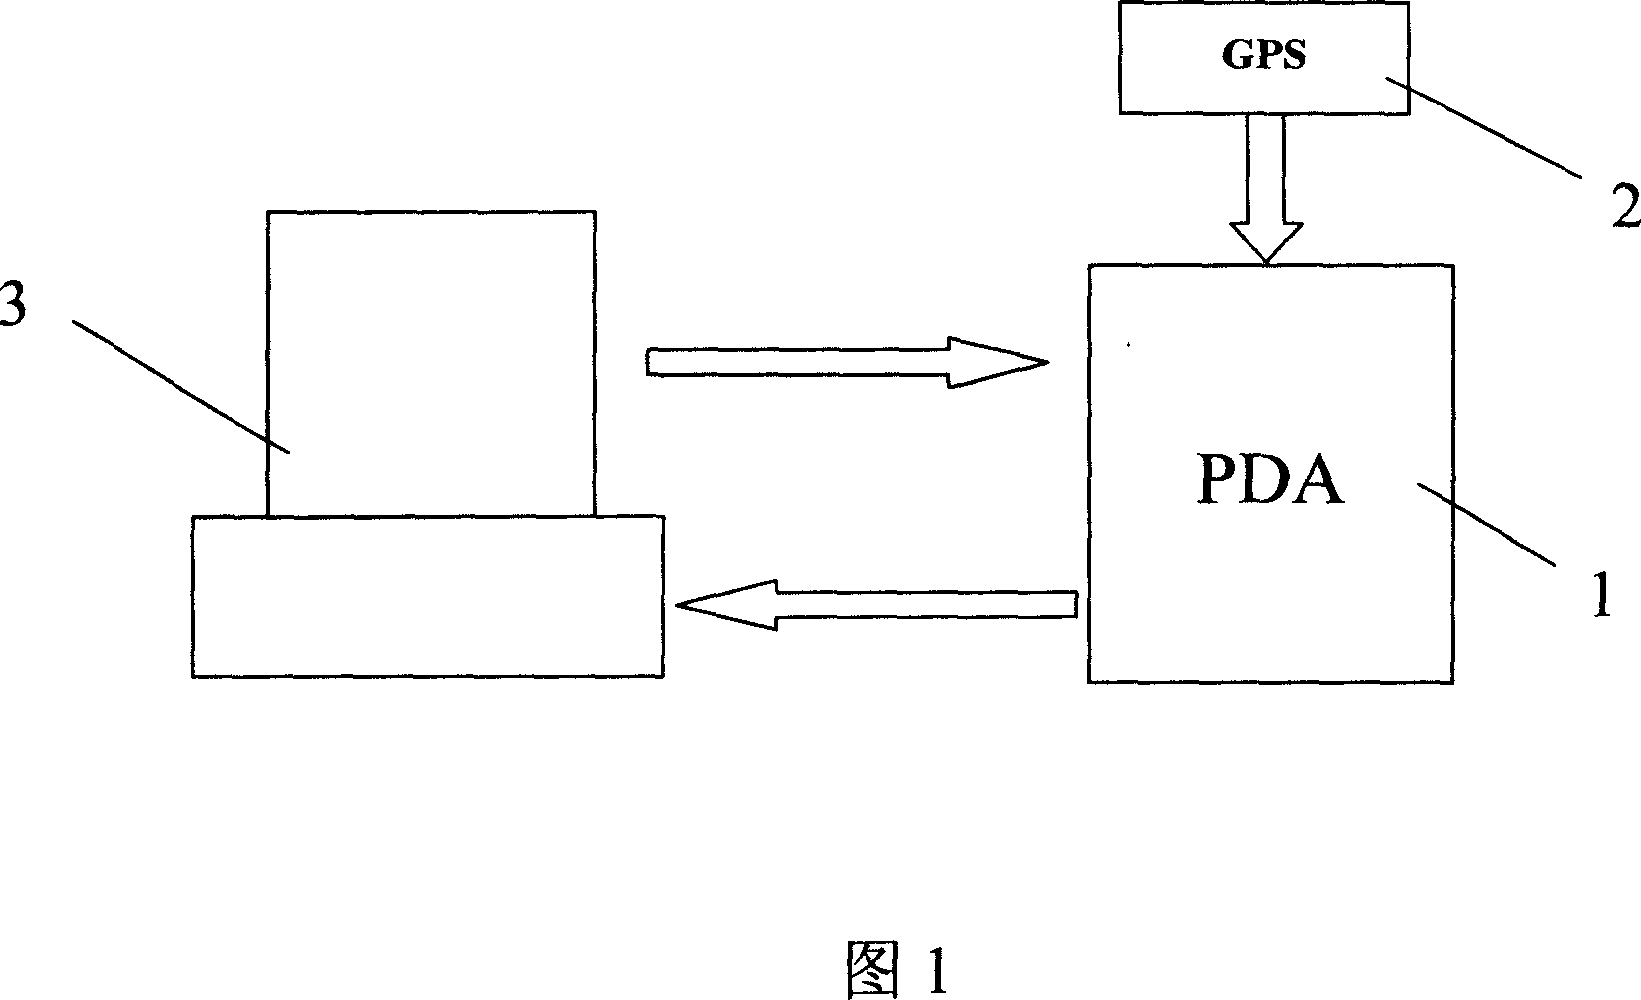 Portable traffic information data collecting system